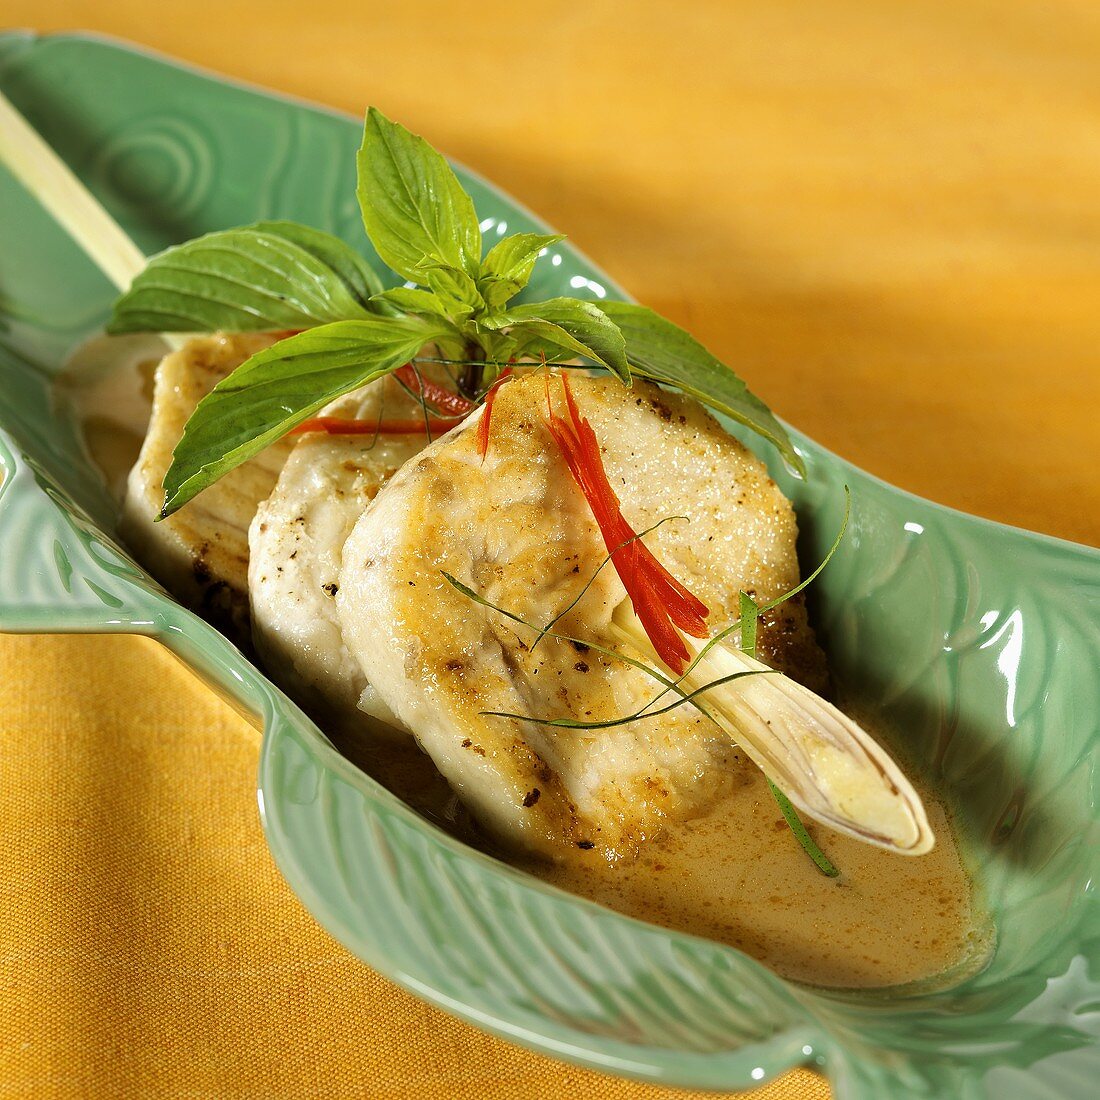 Swordfish fillet with lemon grass in curry sauce